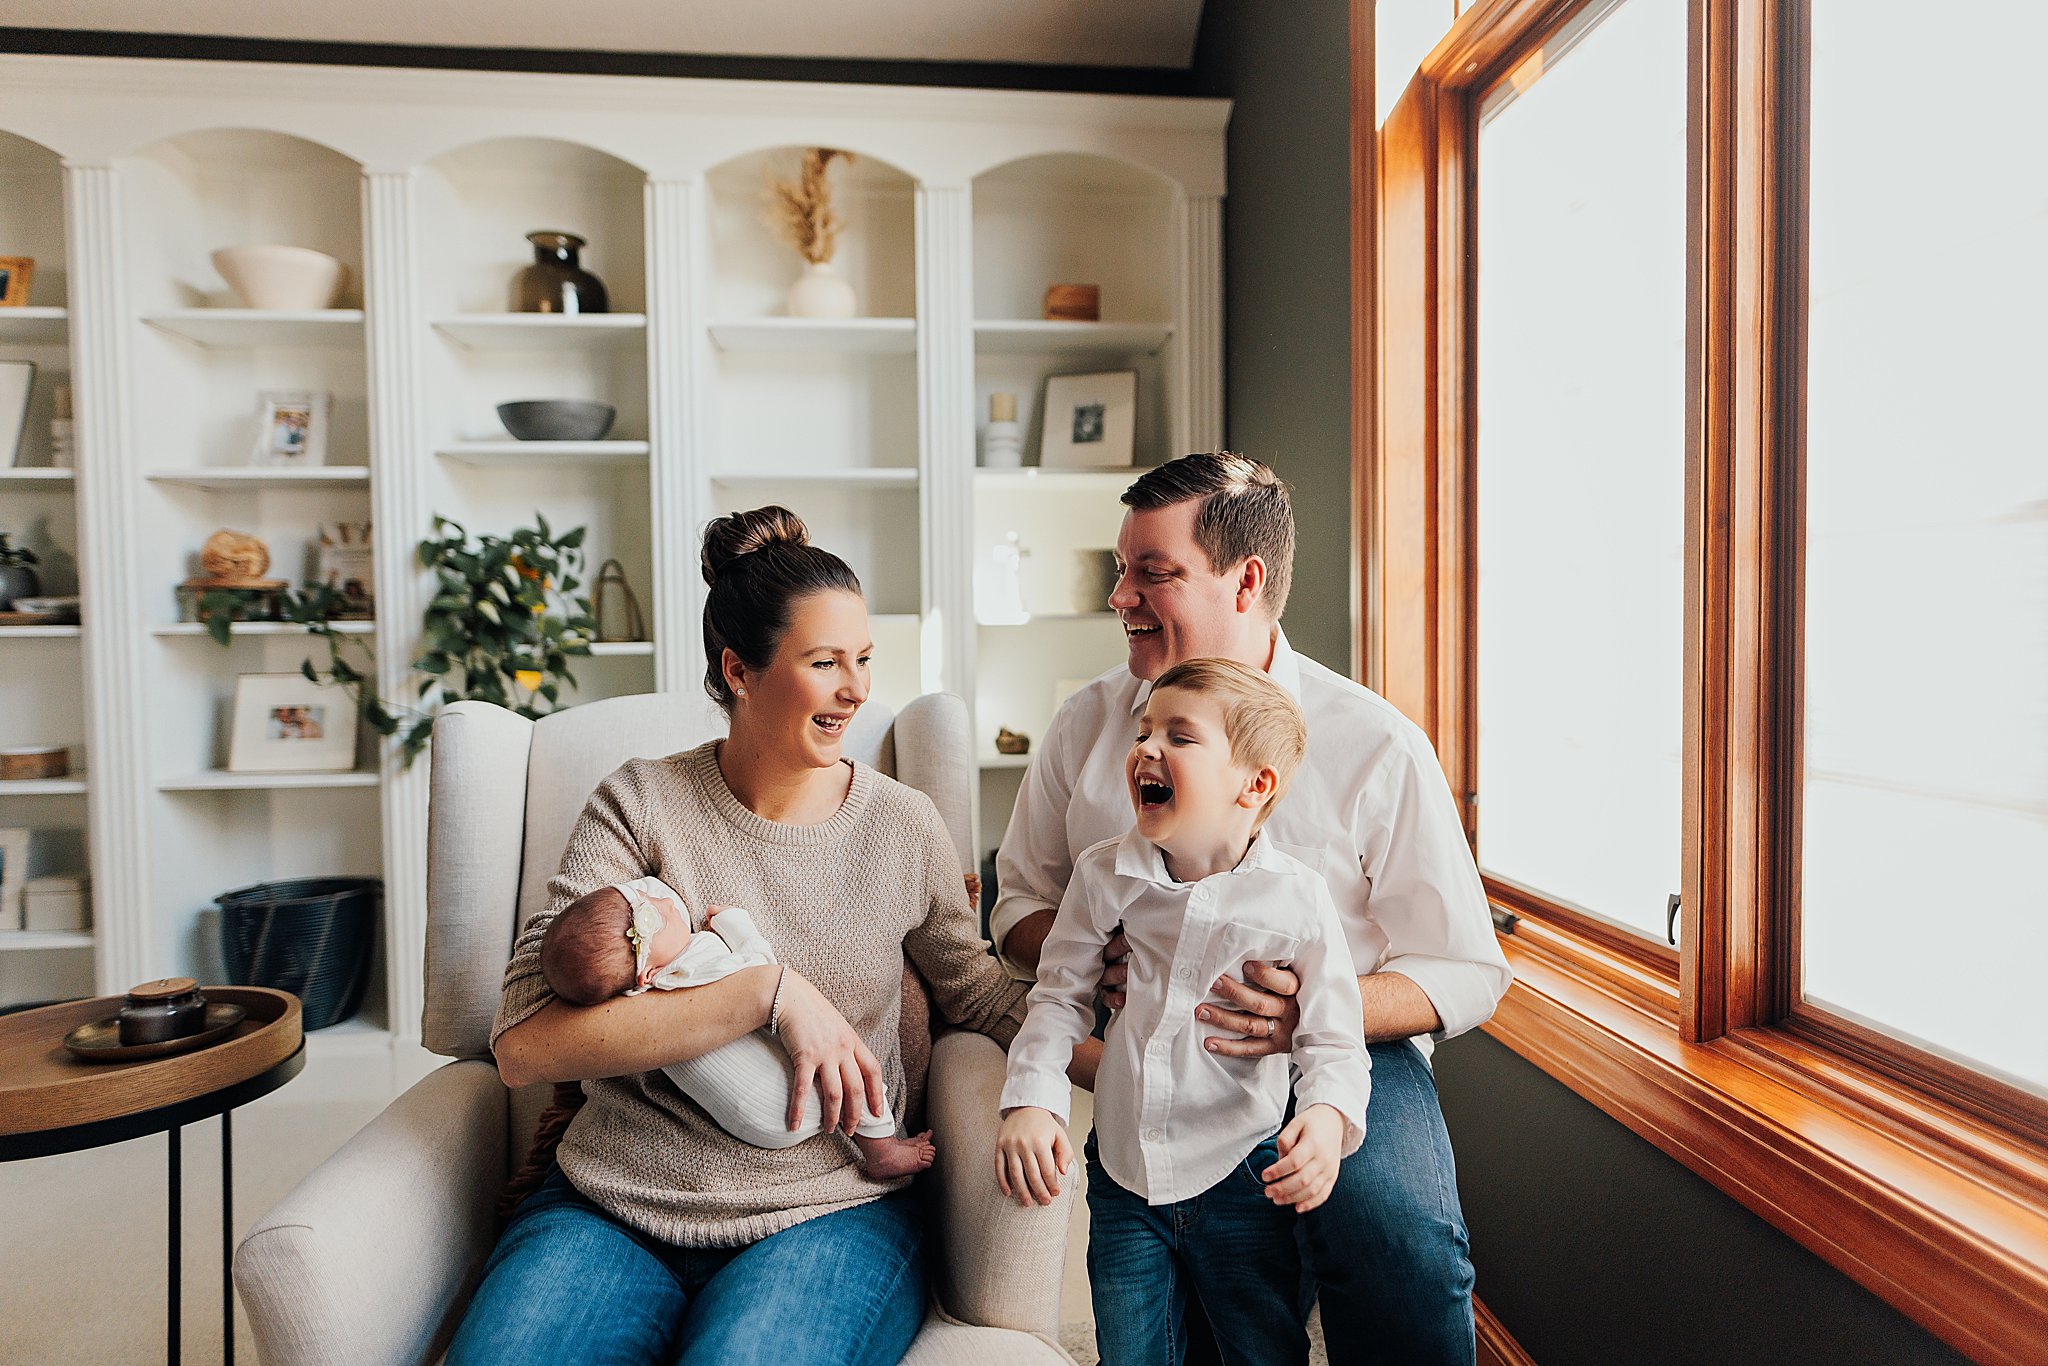 A family enjoys tender moments with their newborn in the comfort of their home